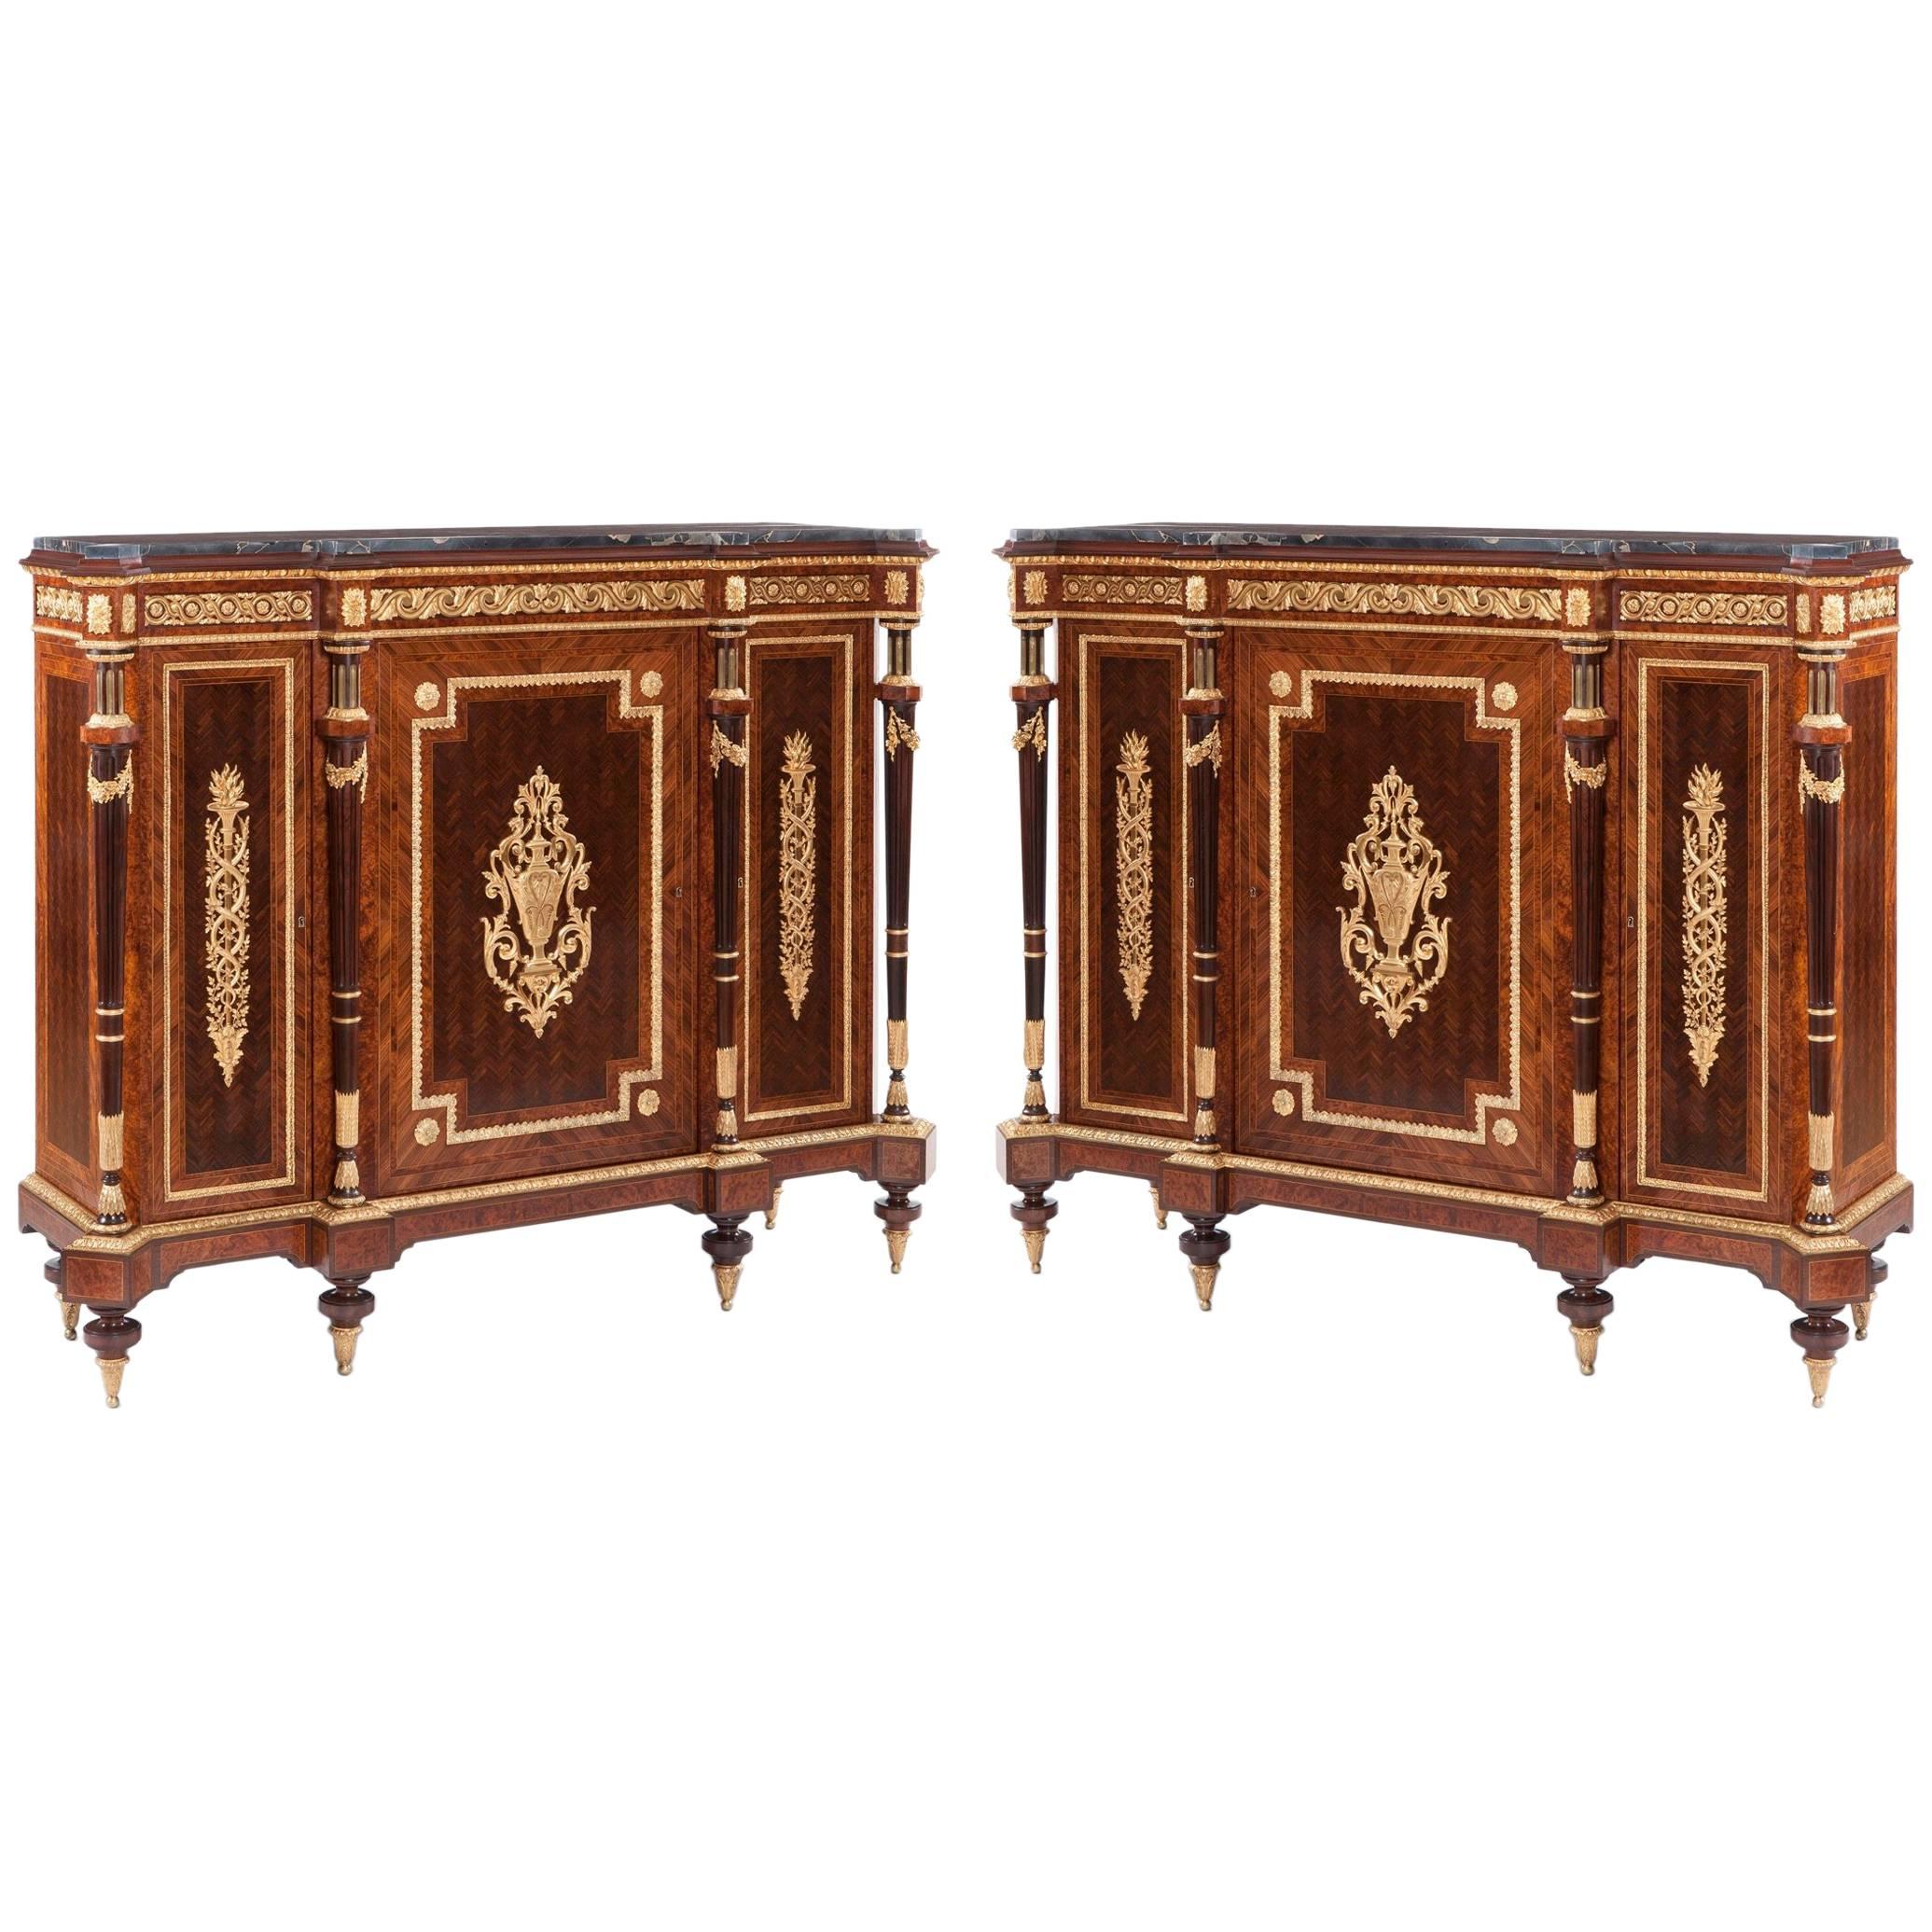 19th Century Pair of Kingwood and Ormolu Cabinets of the Napoleon III Period